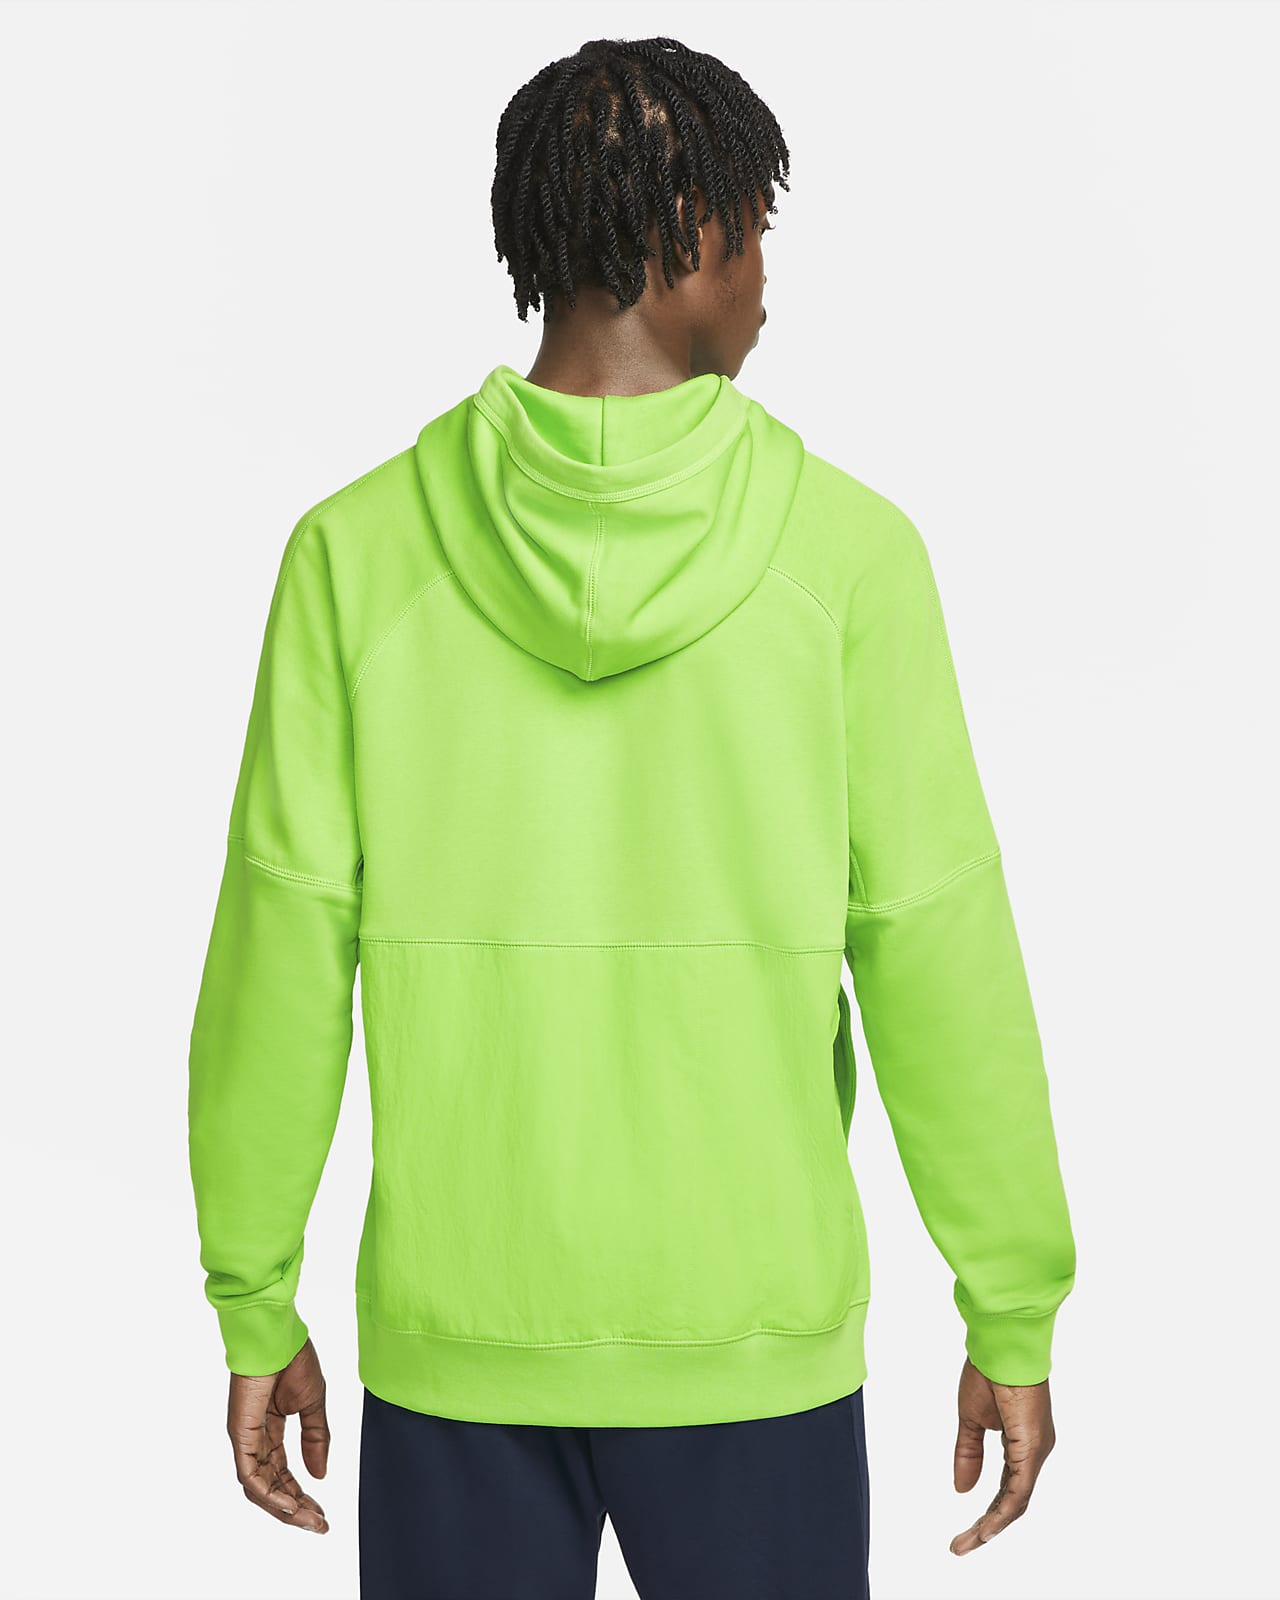 Nigeria Men's French Terry Soccer Hoodie